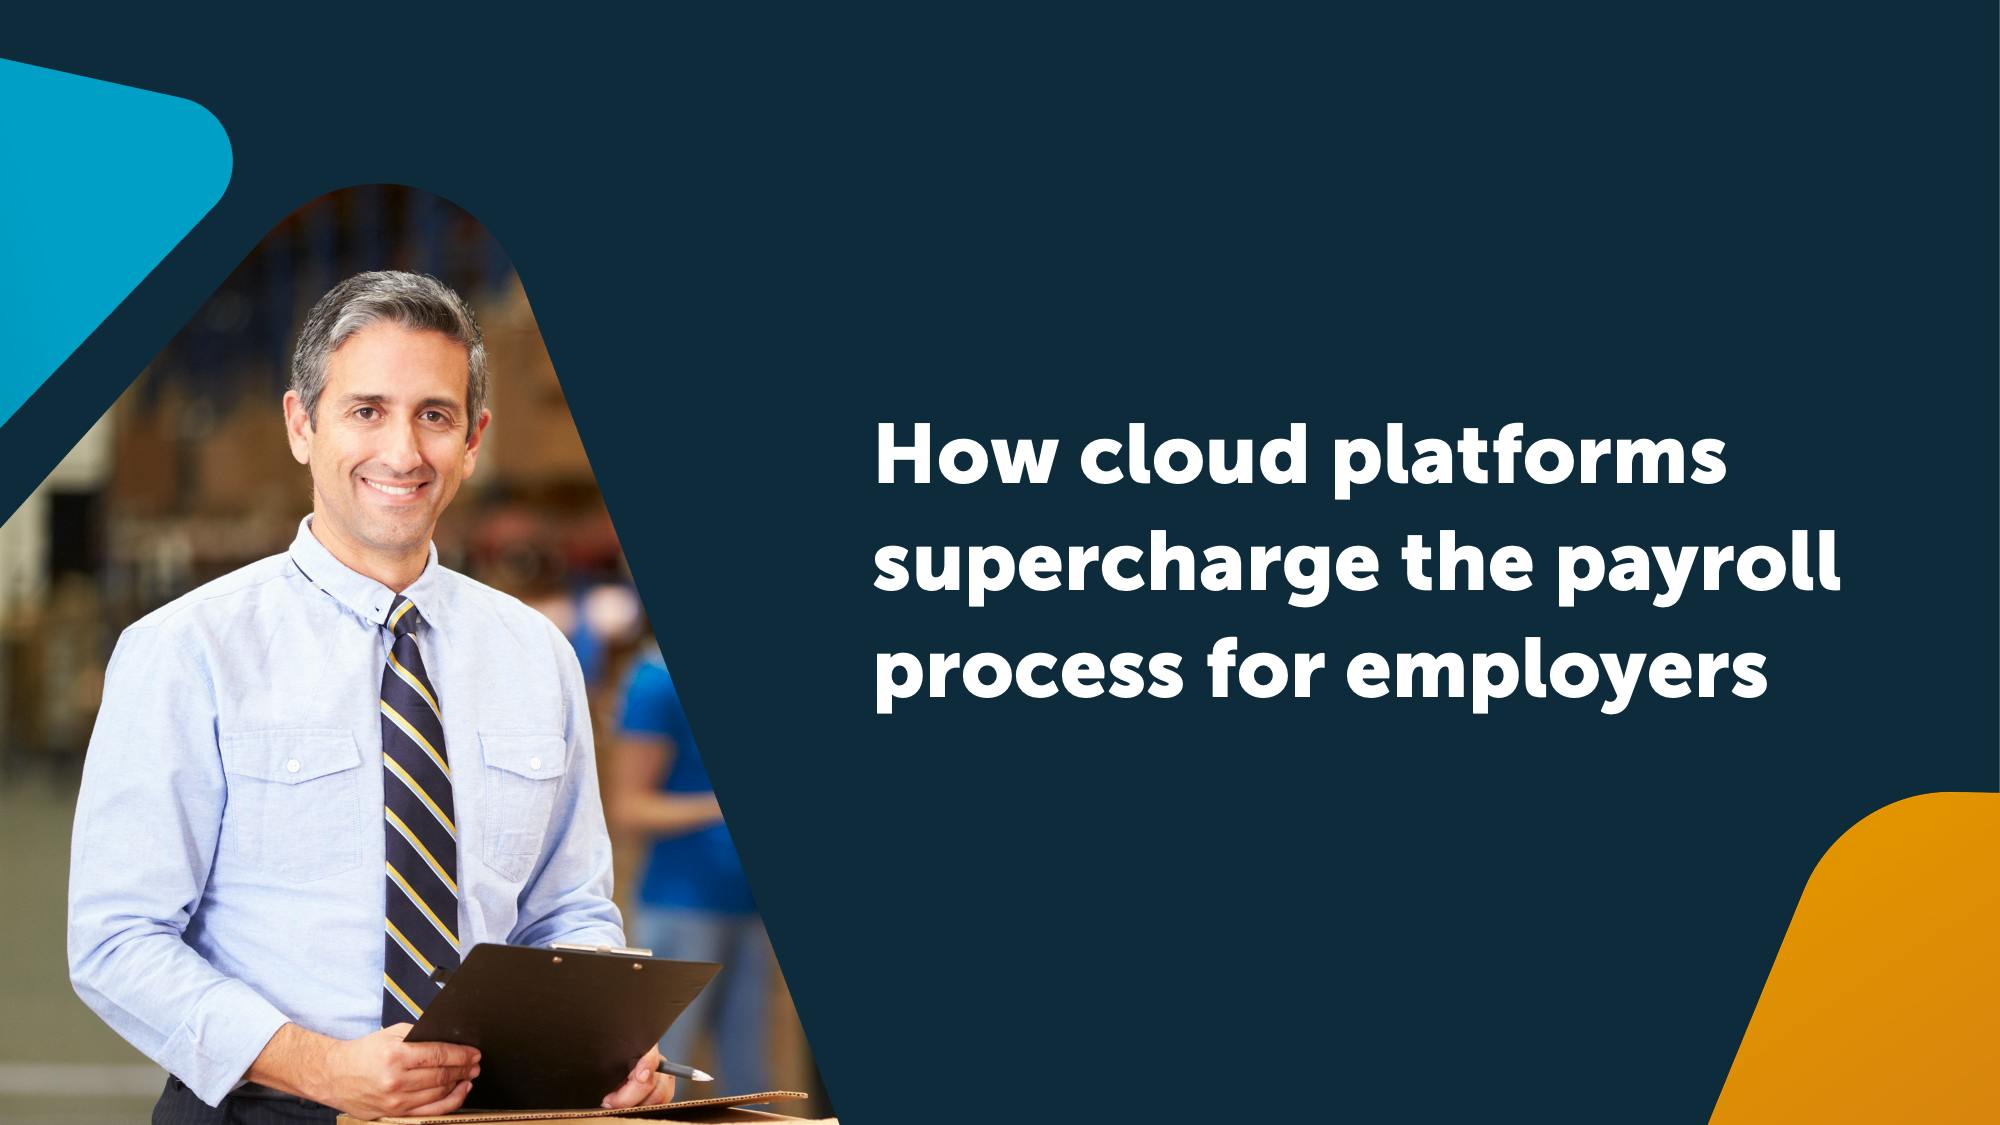 How cloud platforms supercharge the payroll process for employers